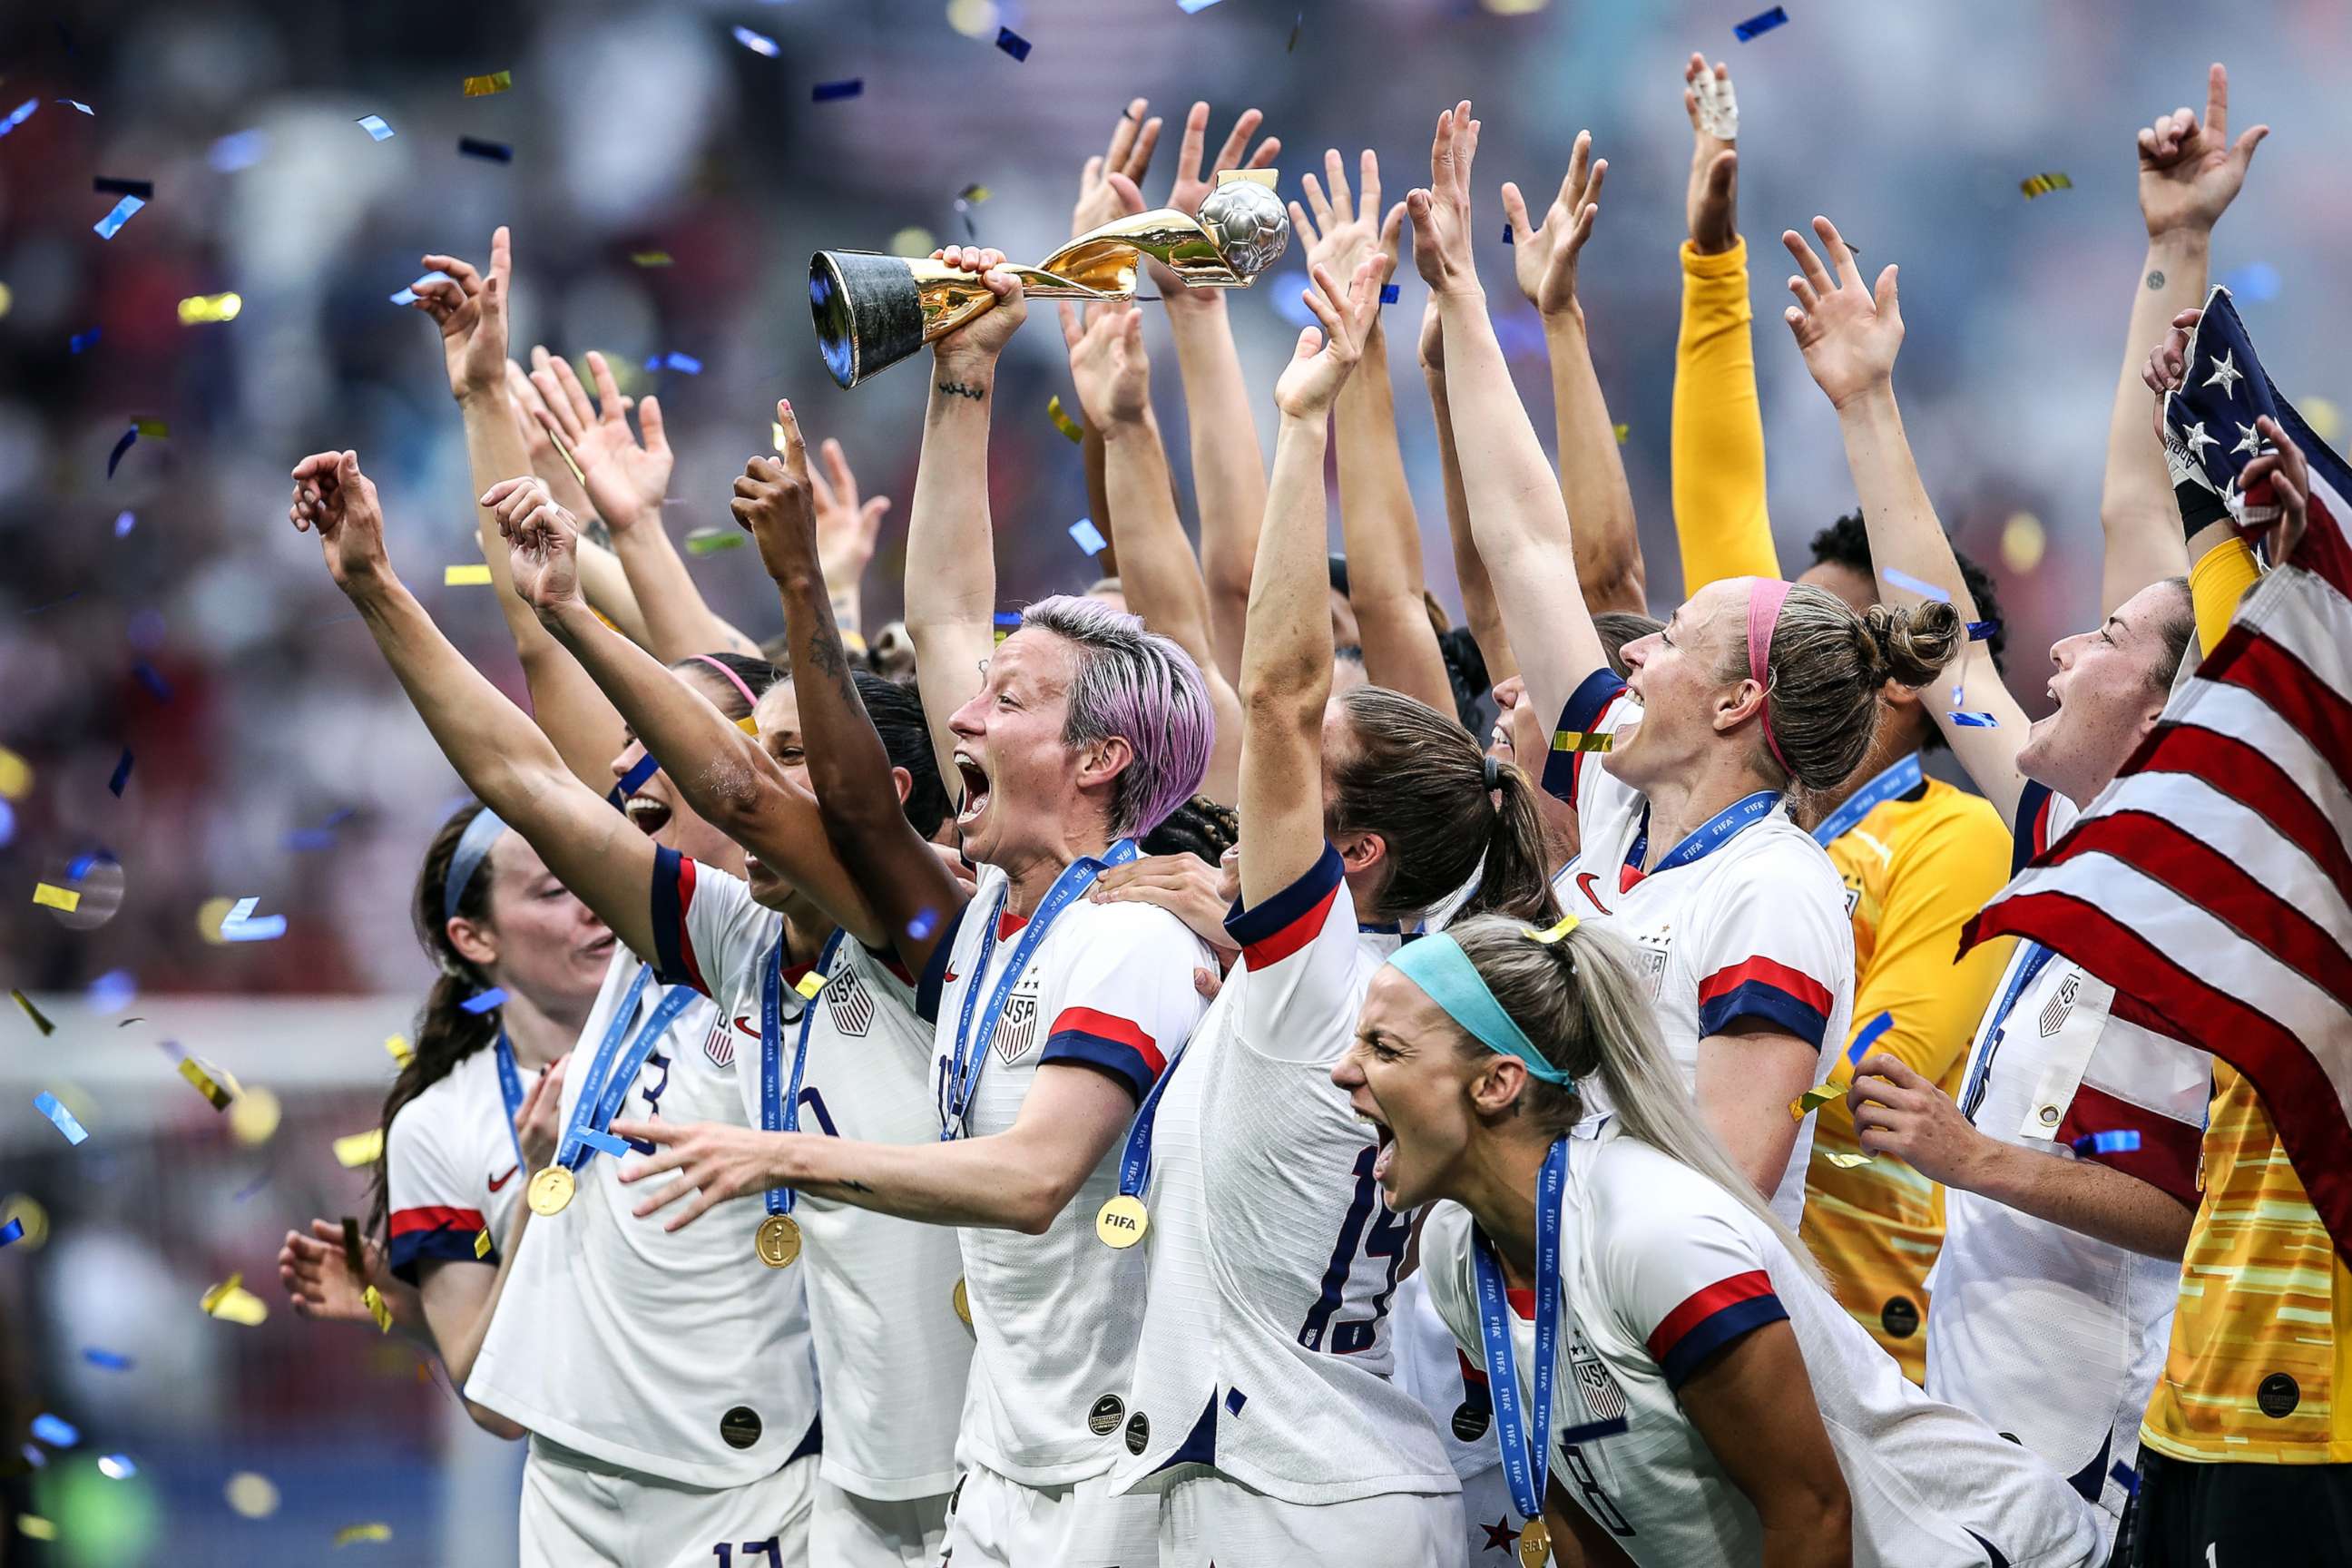 PHOTO: Megan Rapinoe of the USA lifts the FIFA Women's World Cup Trophy following her team's victory in the 2019 FIFA Women's World Cup France Final match between The U.S. and The Netherlands at Stade de Lyon on July 07, 2019, in Lyon, France.